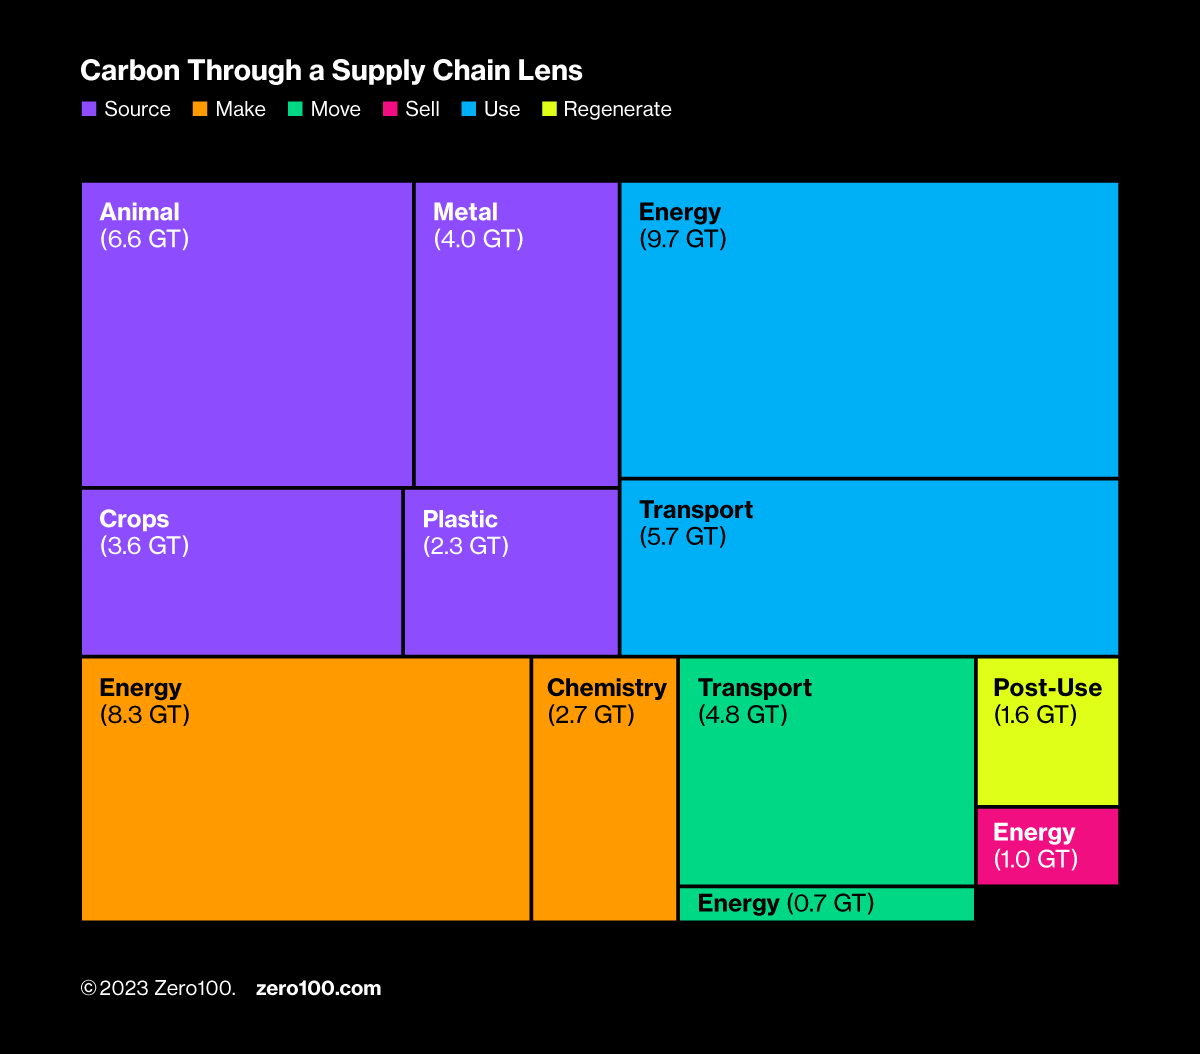 Block pictogram showing carbon emissions across supply chain functions.
Source: Zero100.